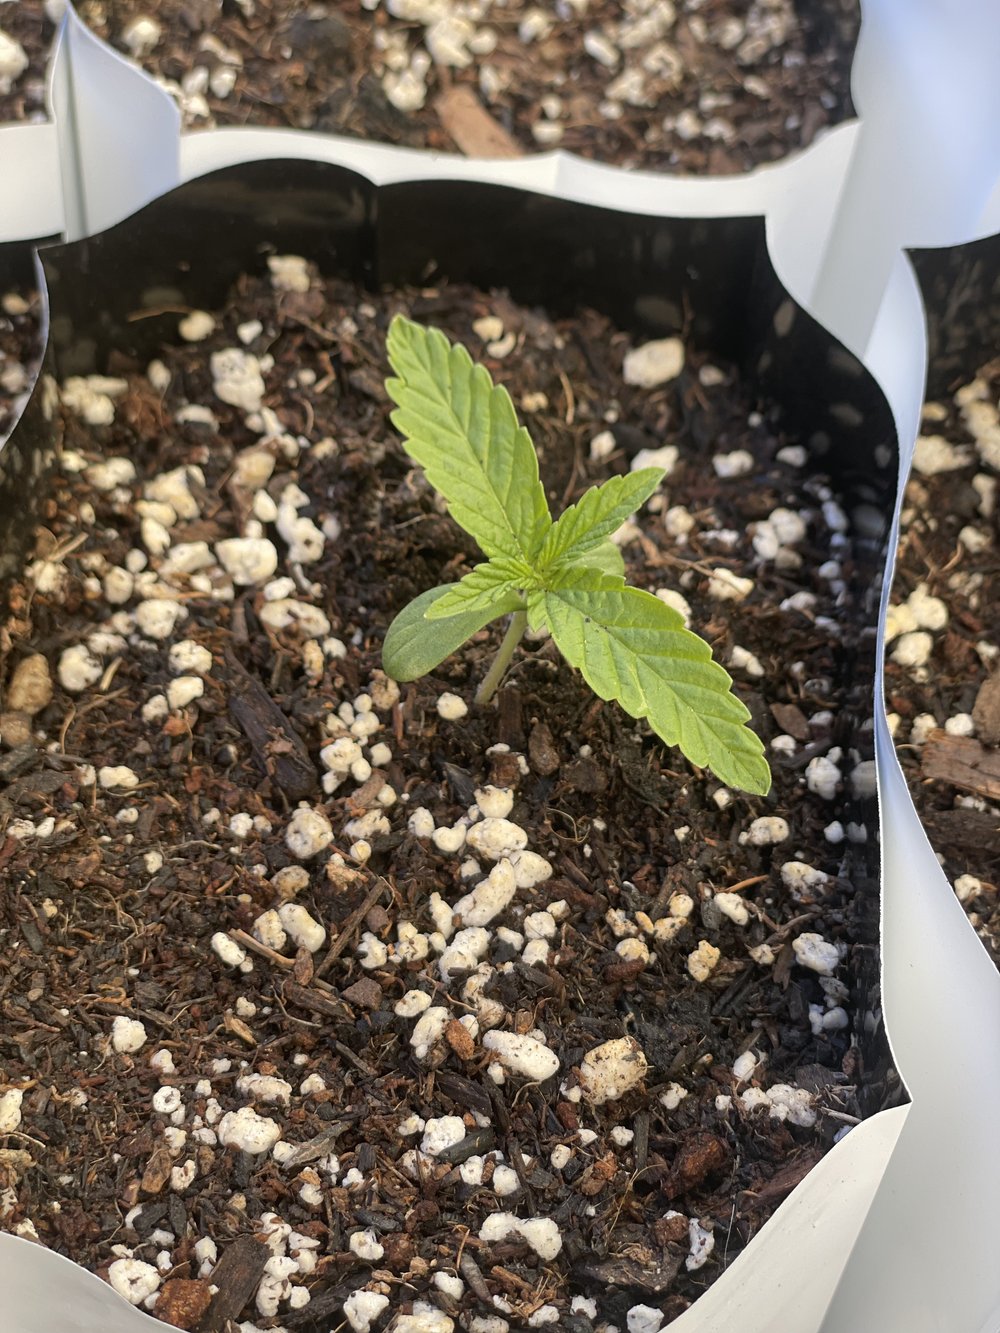 GERMINATE YOUR CANNABIS SEEDS IN 3 DAYS